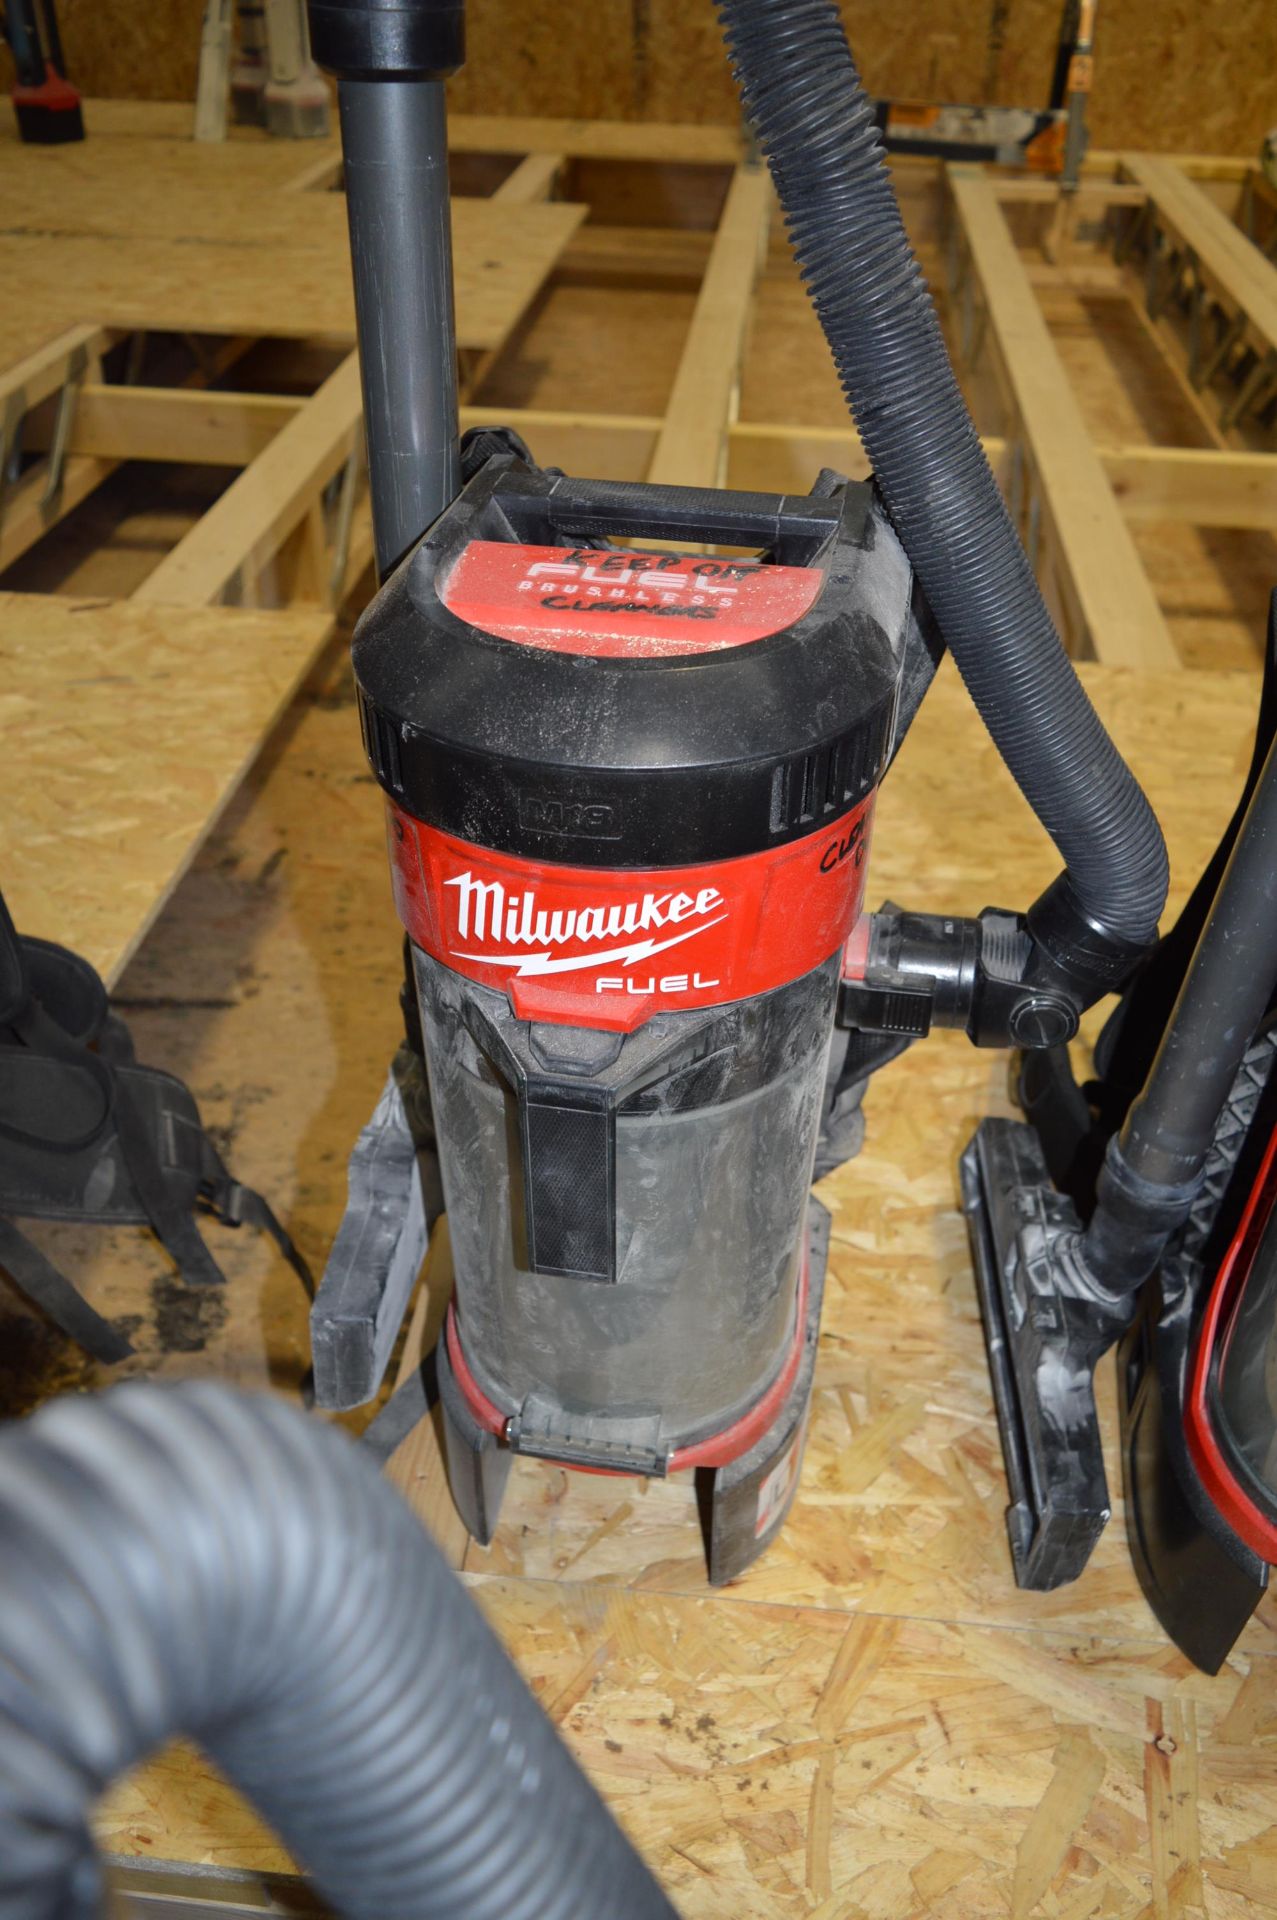 2x (no.) Milwaukee, vacuum cleaners, Model M18 FBPV with one battery and charger - Image 2 of 2